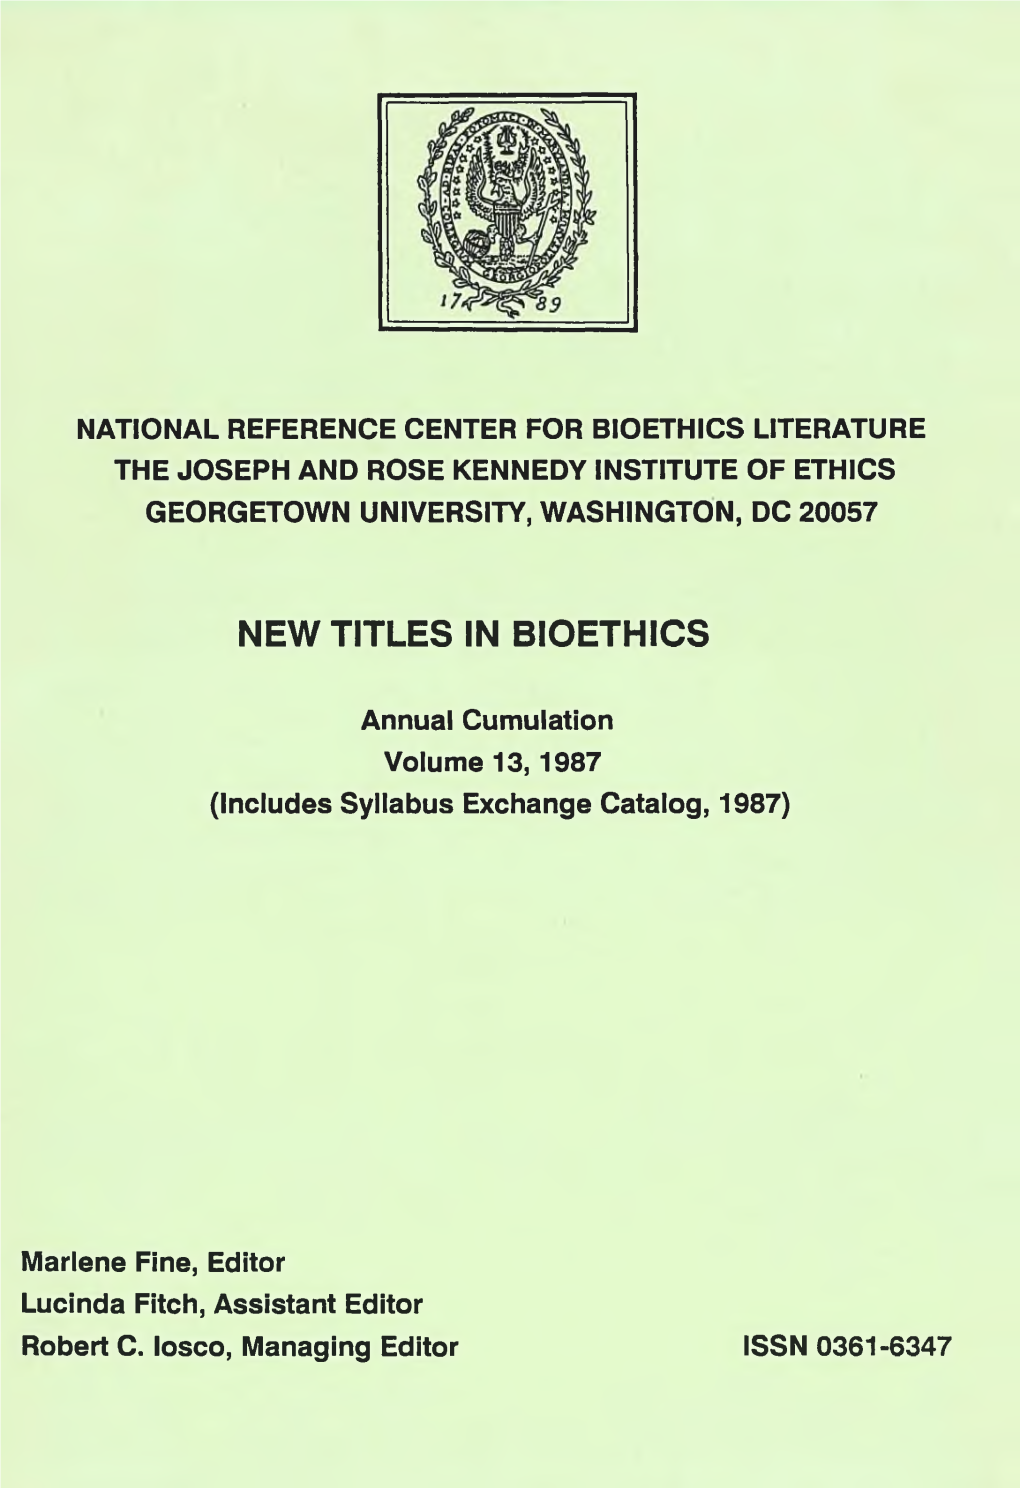 New Titles in Bioethics